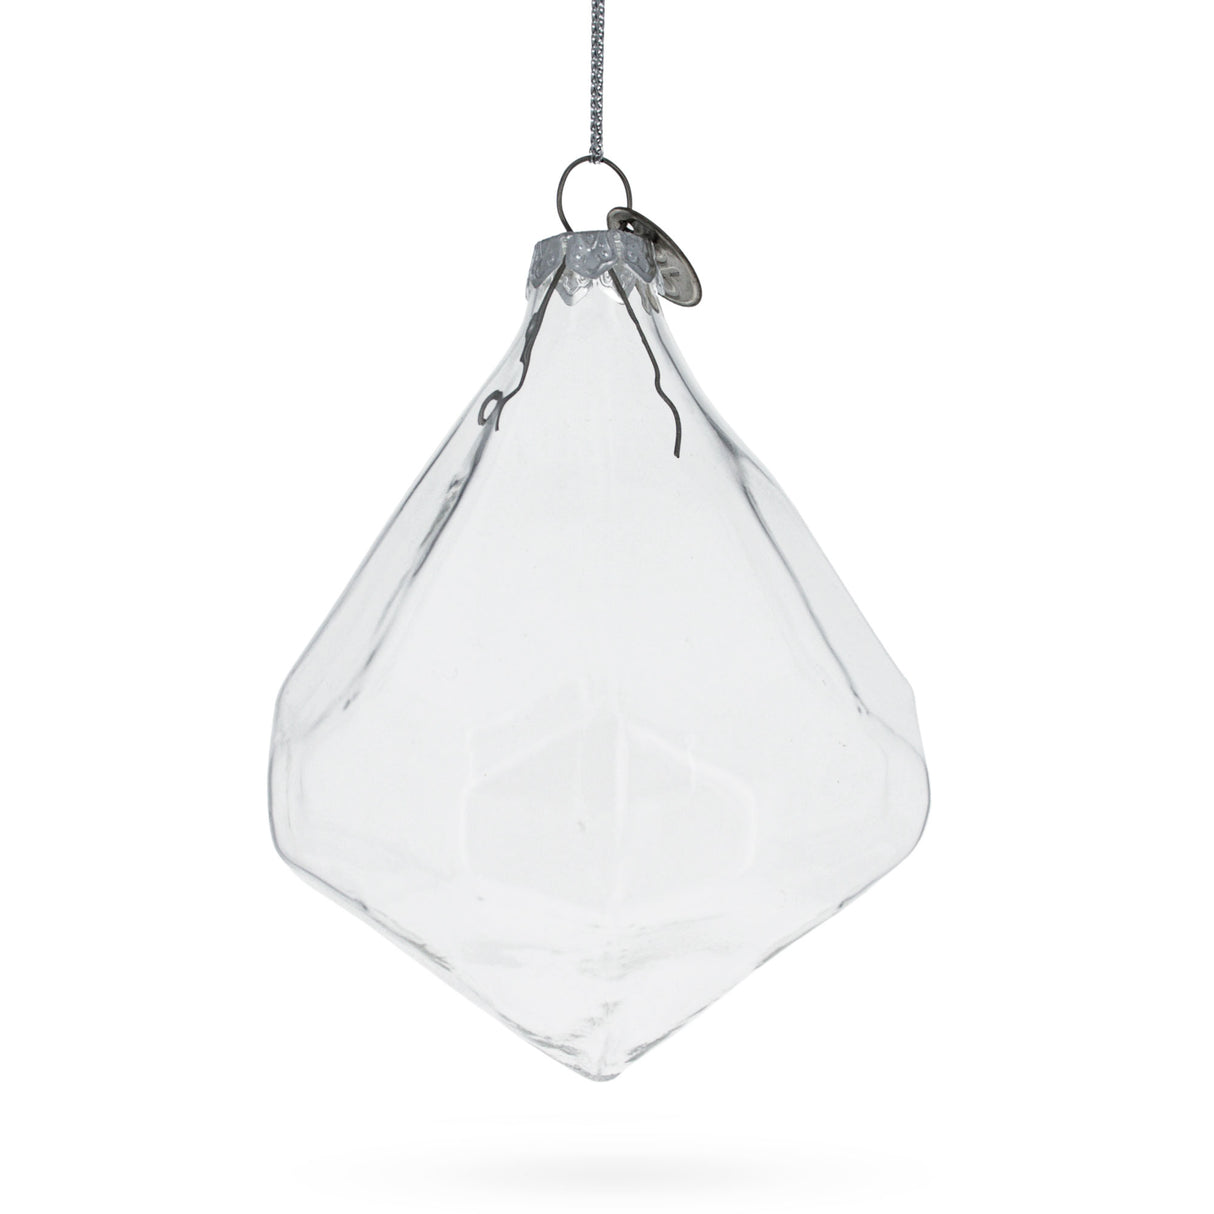 Diamond Shape - Blown Clear Glass Christmas Ornament 3.6 Inches in Clear color, Rhombus shape